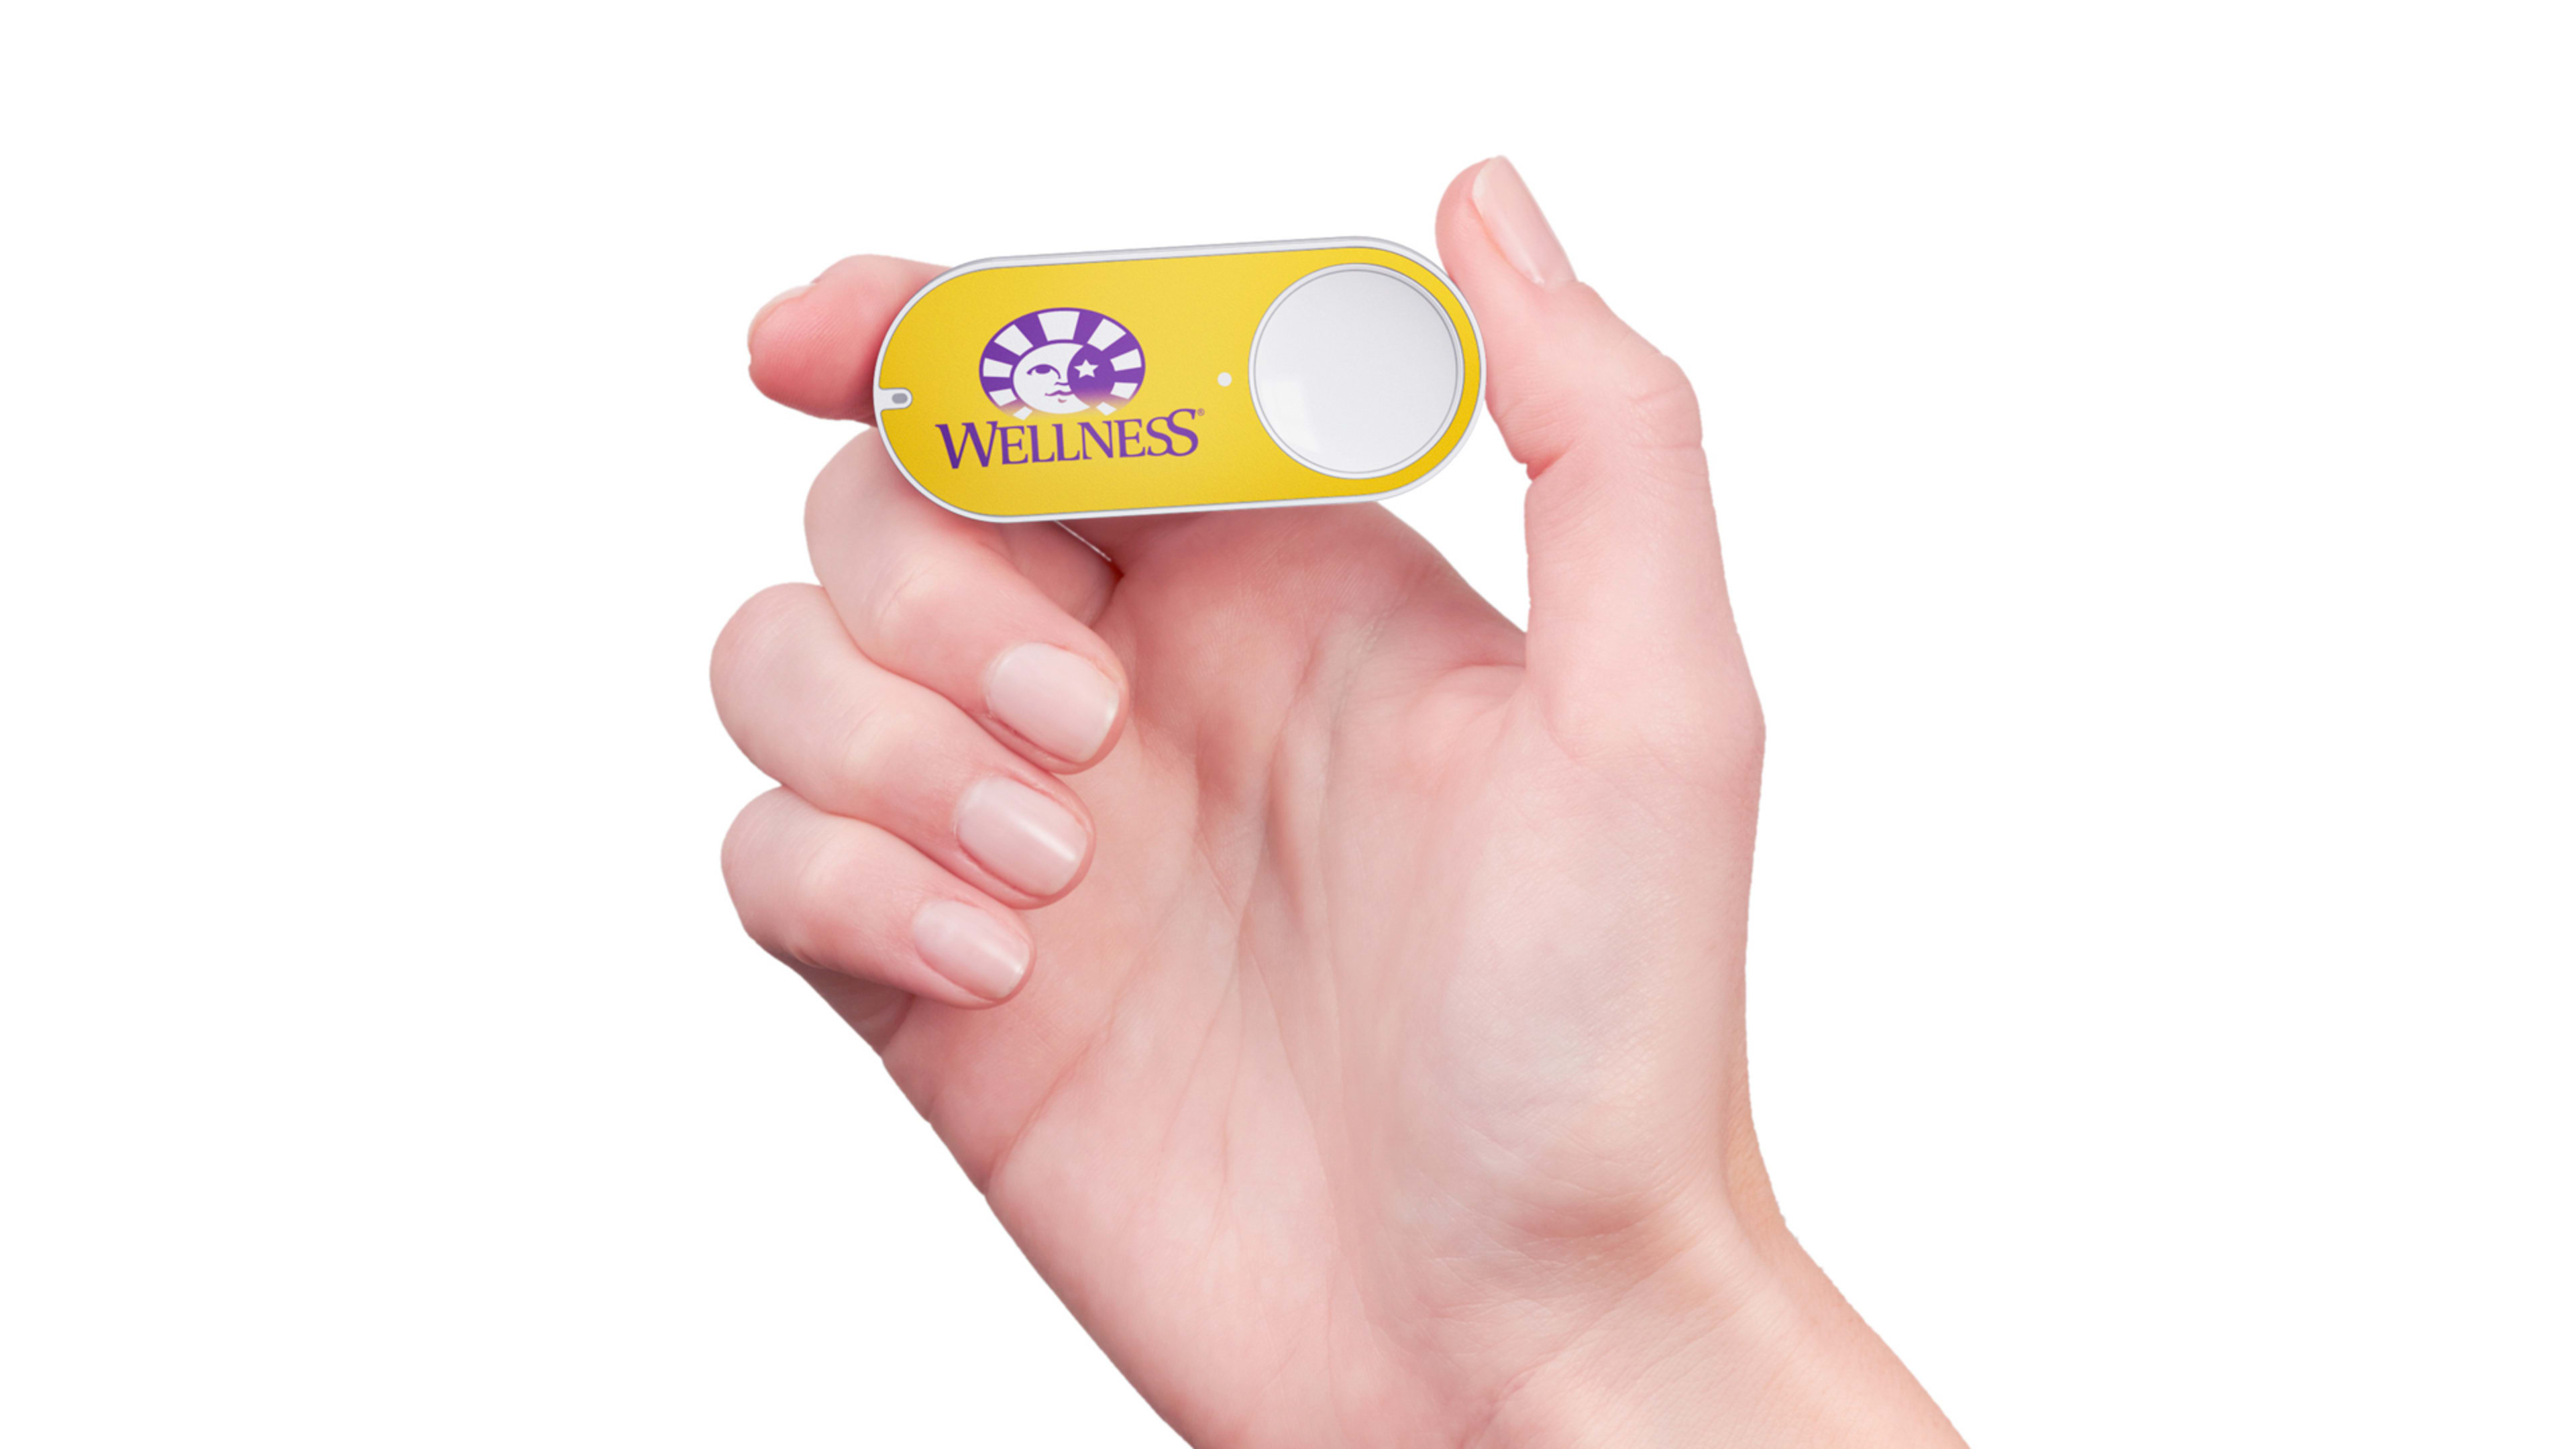 Amazon’s Dash buttons have been outlawed in Germany